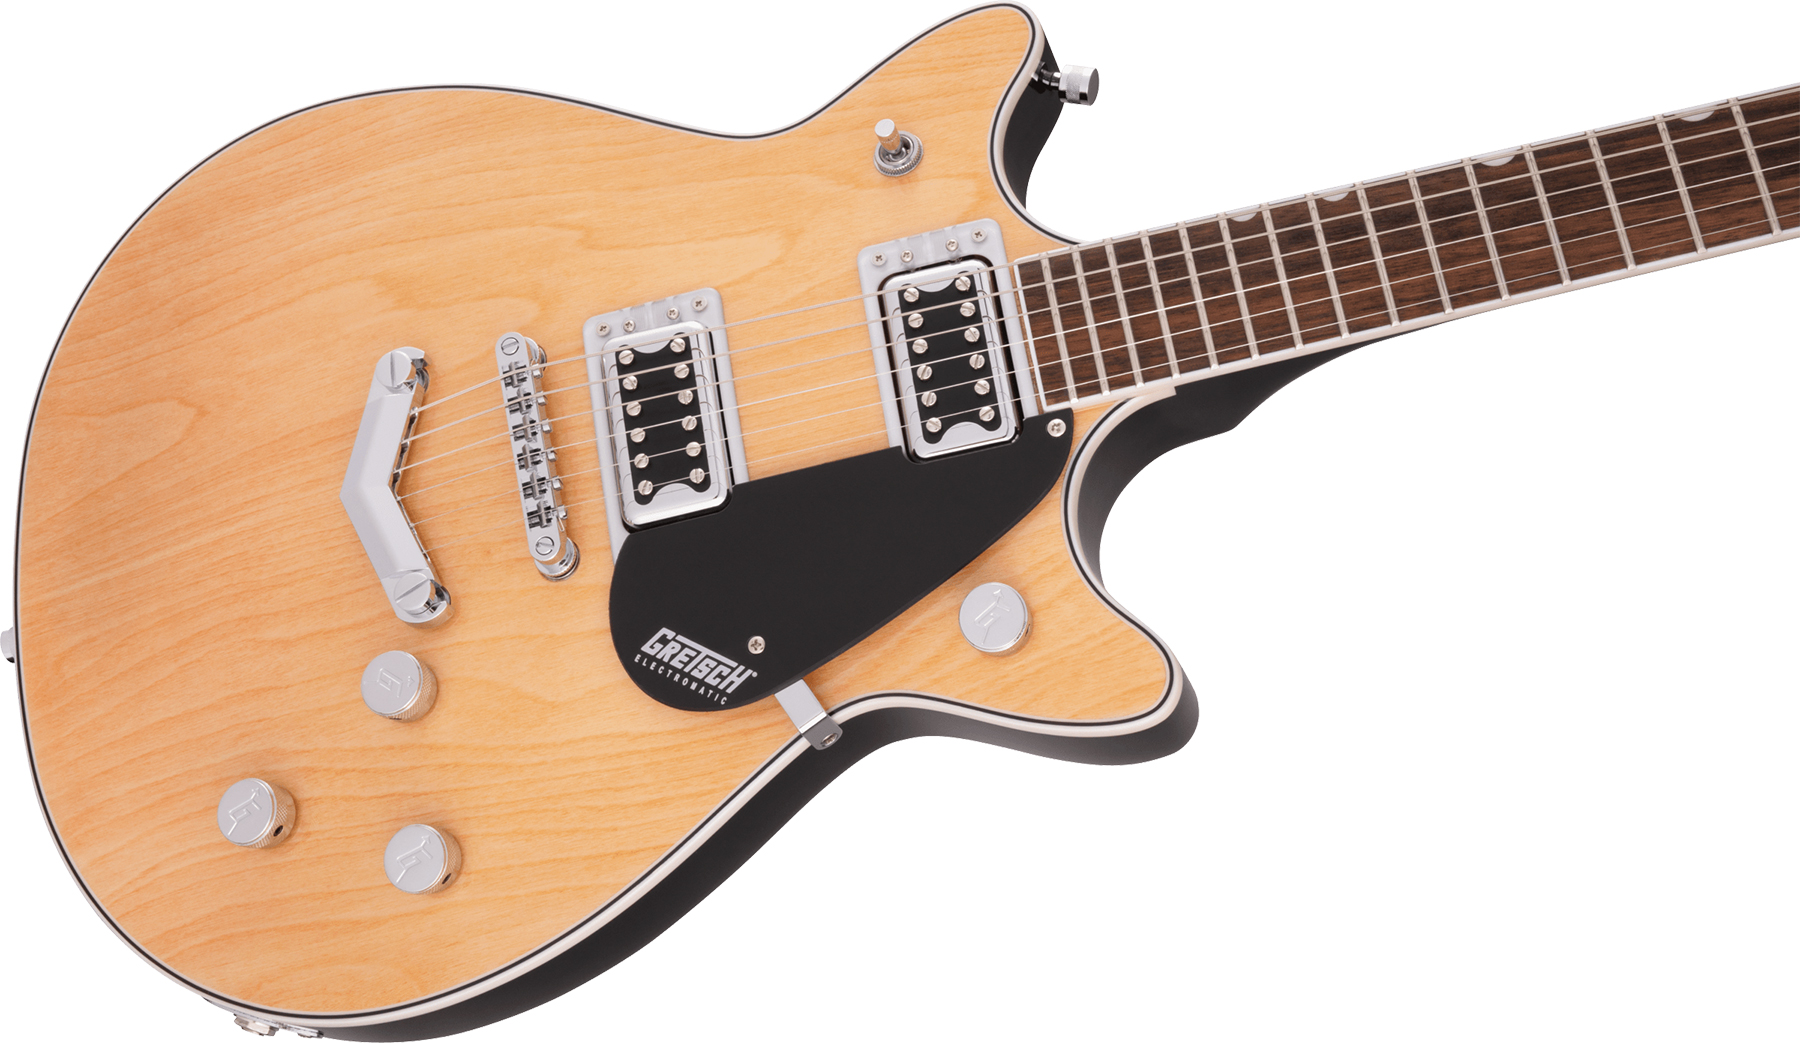 Gretsch G5222 Electromatic Double Jet Bt V-stoptail Hh Ht Lau - Aged Natural - Double cut electric guitar - Variation 2